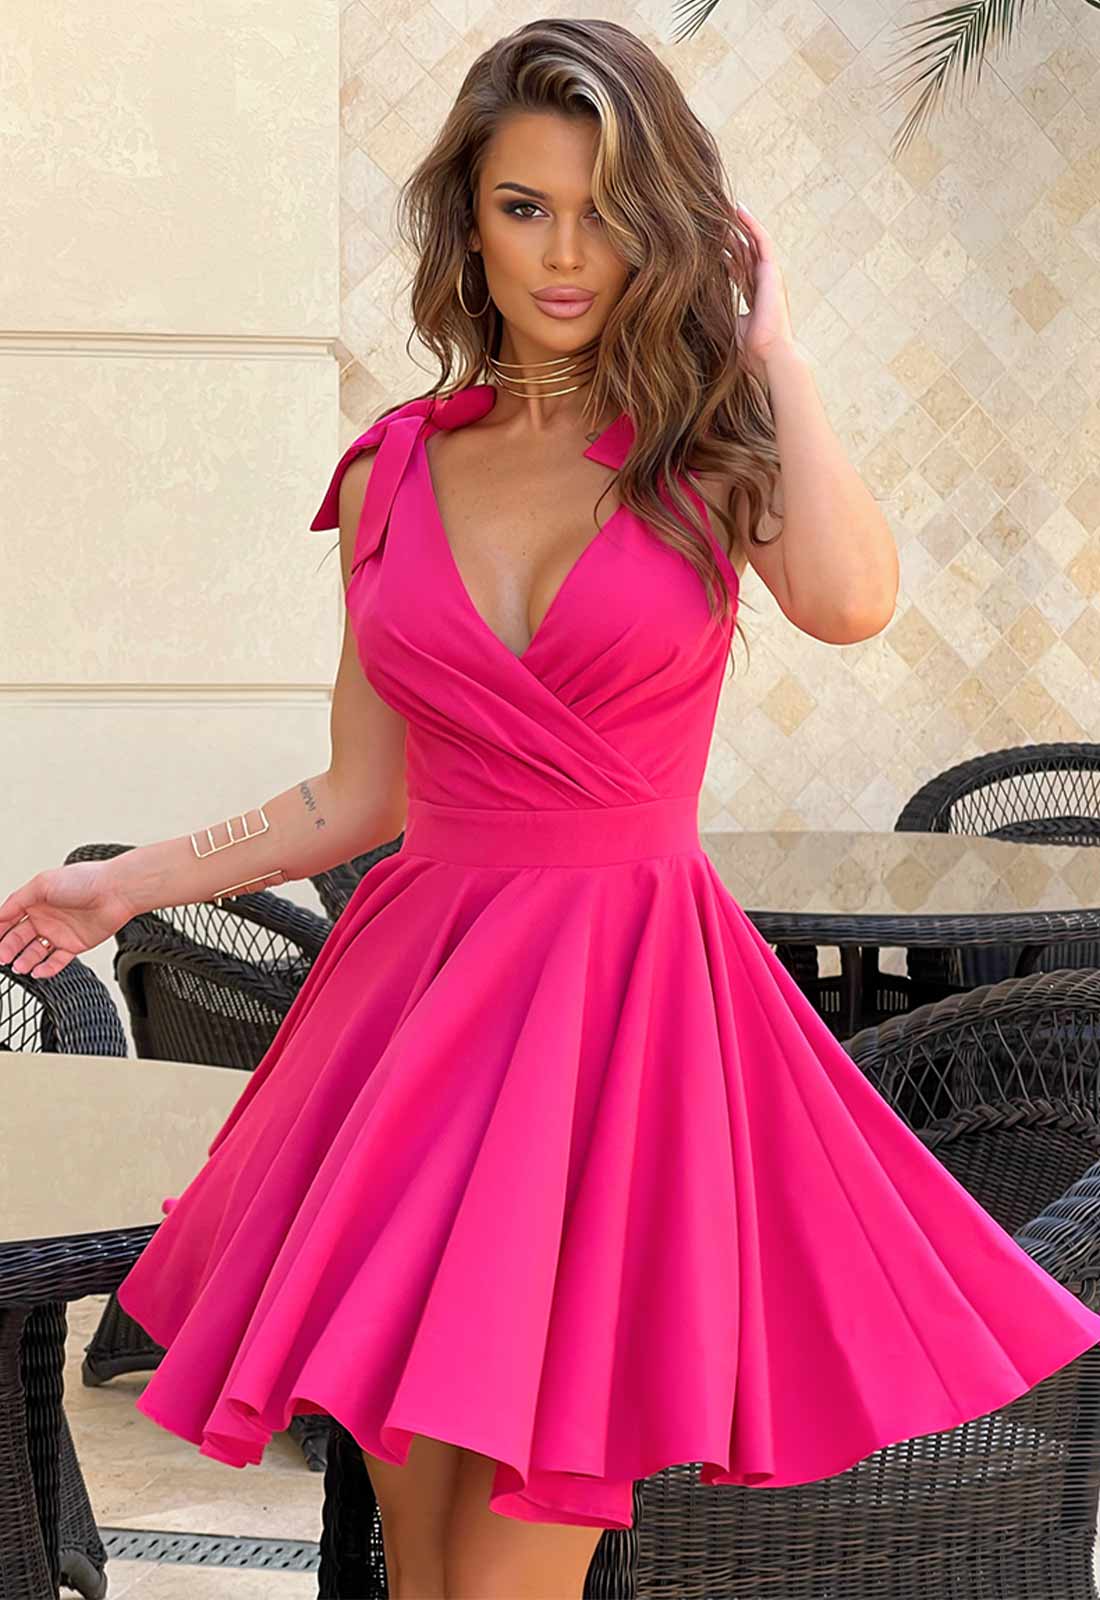 Dresses for all occasions